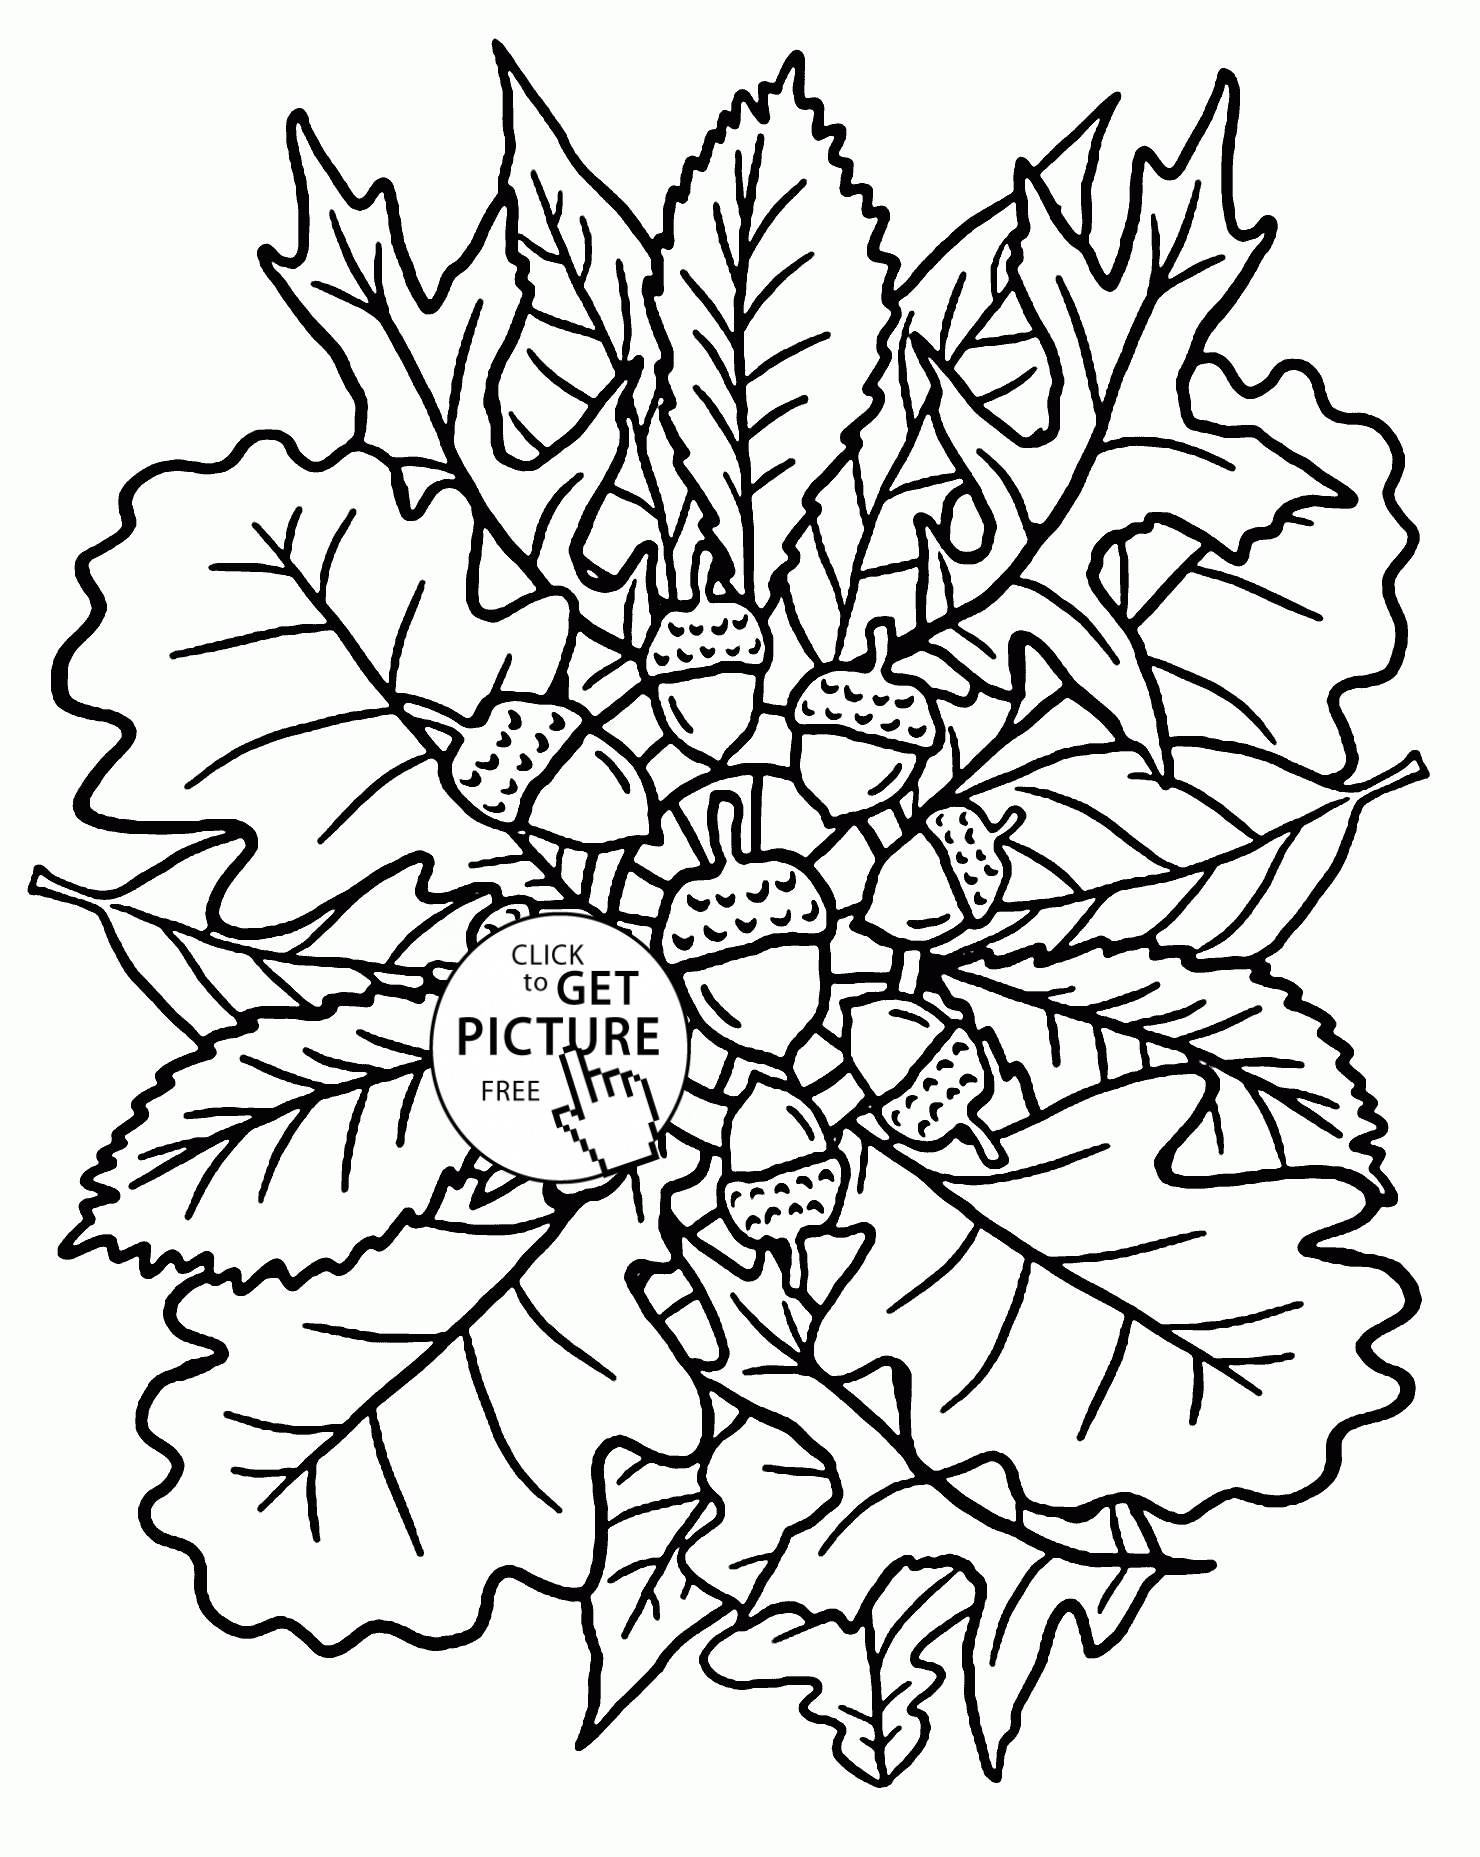 free colouring pictures autumn leaves fall leaves coloring pages best coloring pages for kids pictures autumn leaves colouring free 